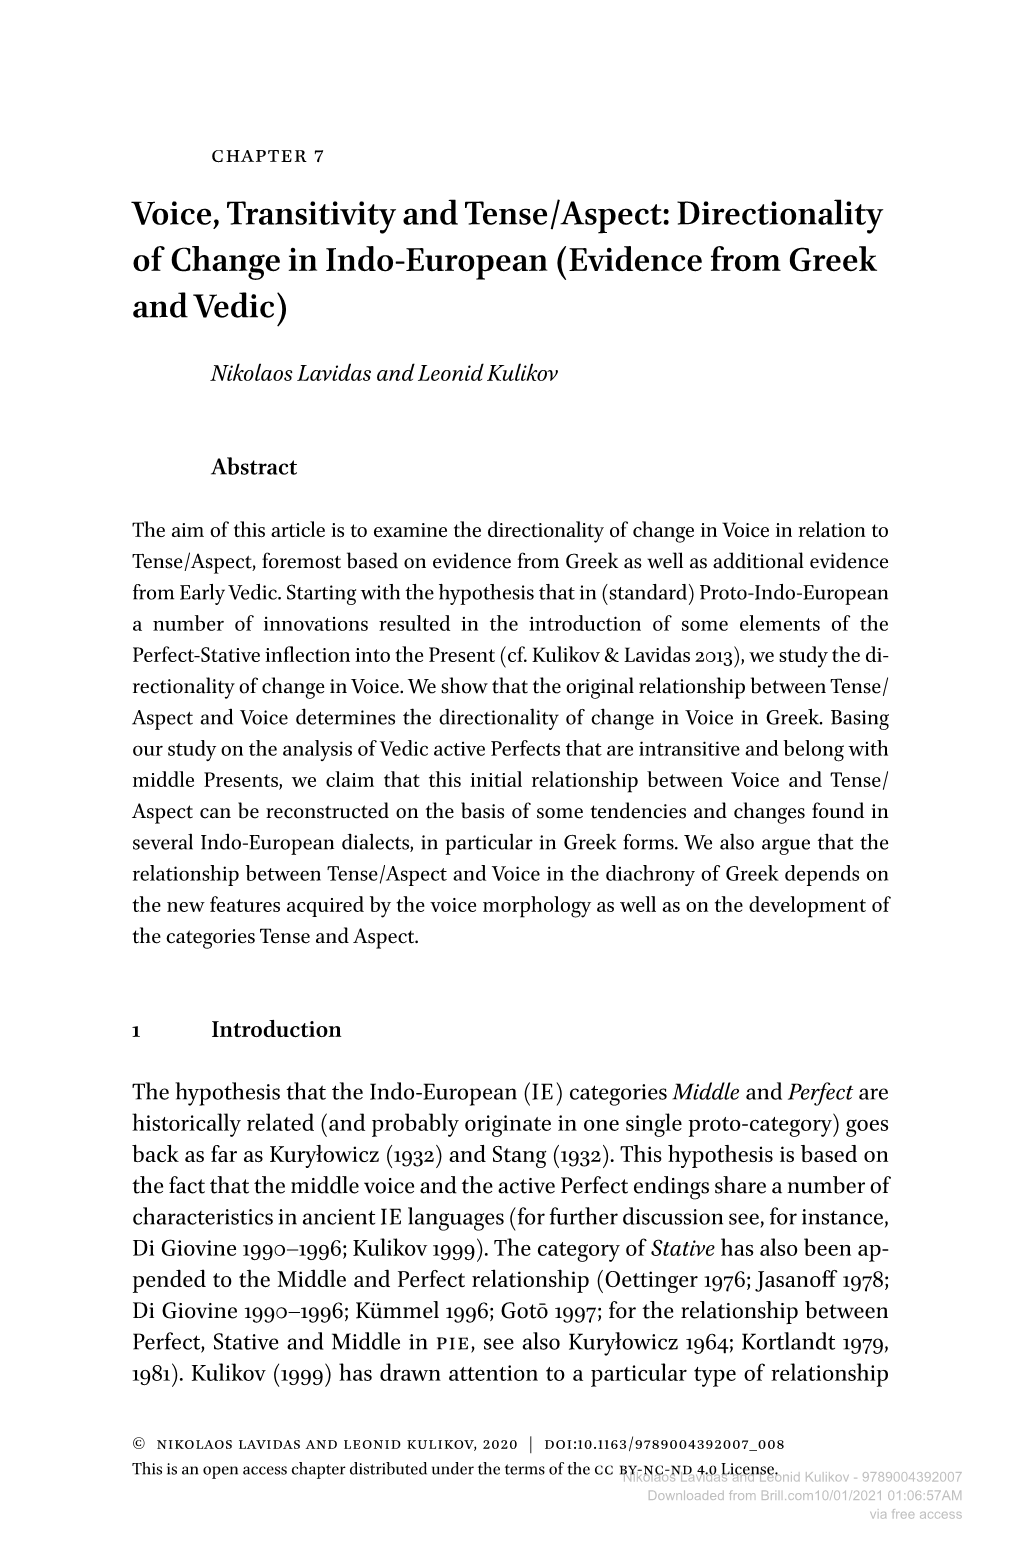 Voice, Transitivity and Tense/Aspect: Directionality of Change in Indo-European (Evidence from Greek and Vedic)